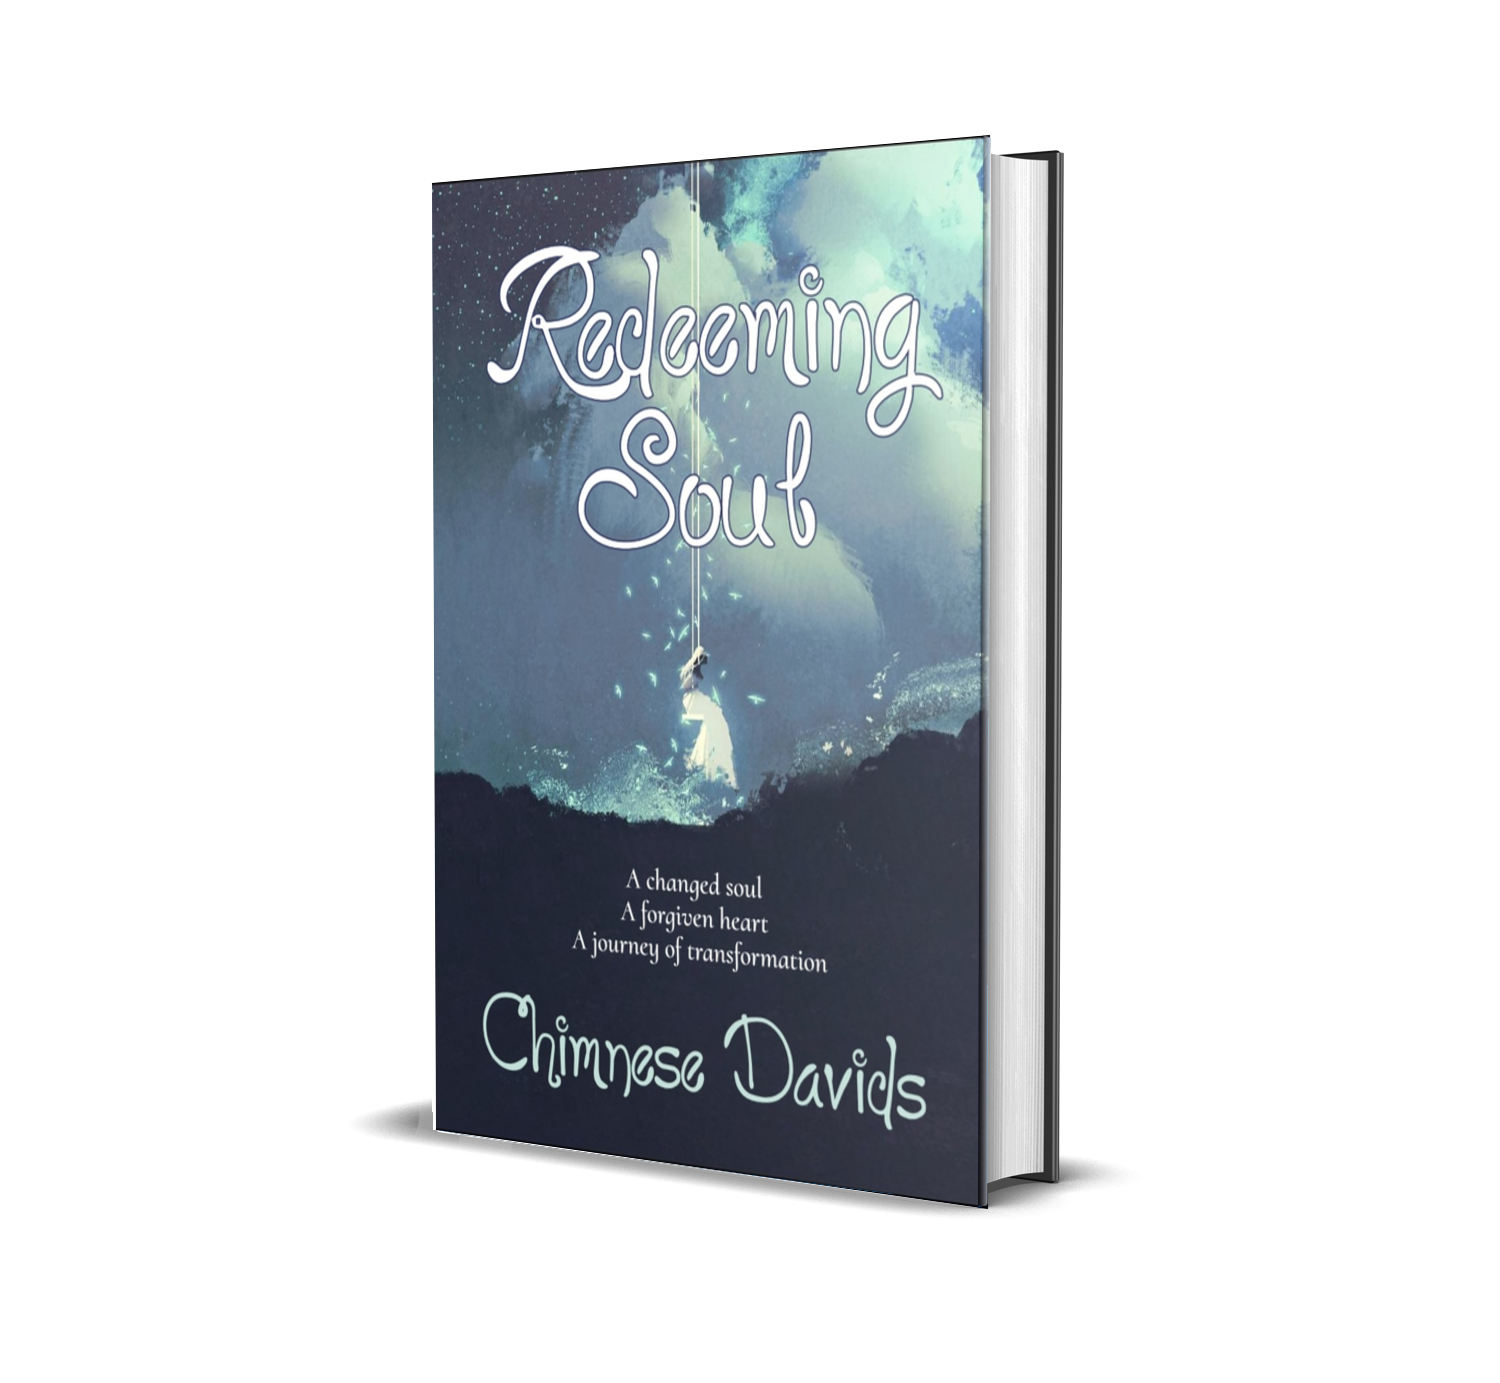 Redeeming Soul: A changed soul, a forgiven heart, a journey of transformation